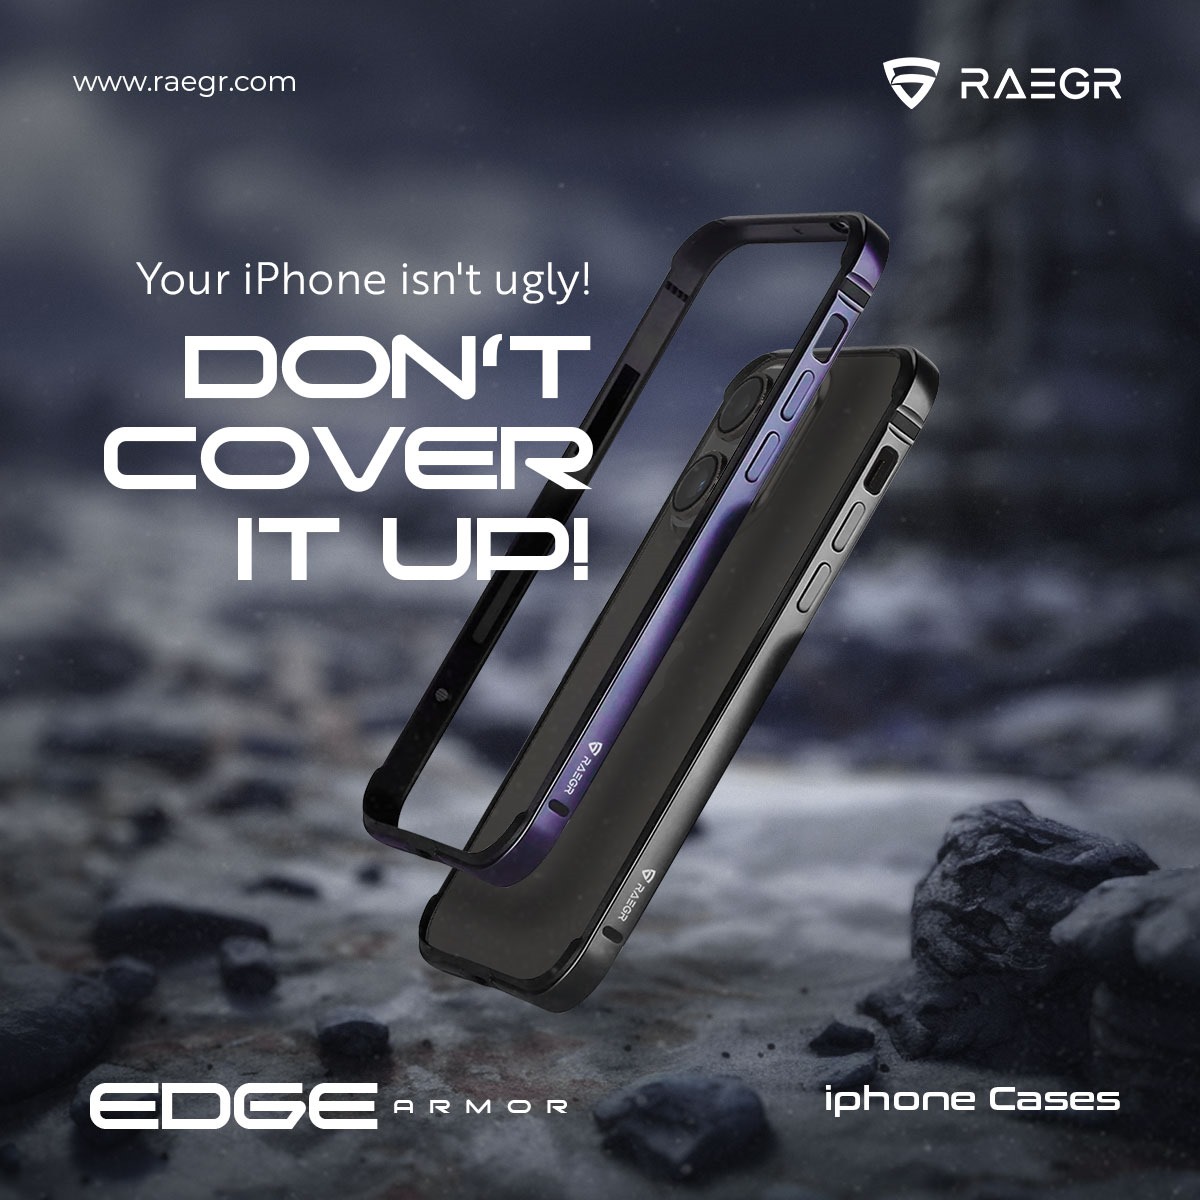 Your iPhone deserves to be shown off! With raised edges that protect your screen and camera and a premium aluminum-alloy frame.

Buy Now!
Raegr:postly.app/3DDC
Tekkitake:postly.app/3DDD
Amazon:postly.app/3DDE

#RAEGR #iPhone14Case #EdgeArmor